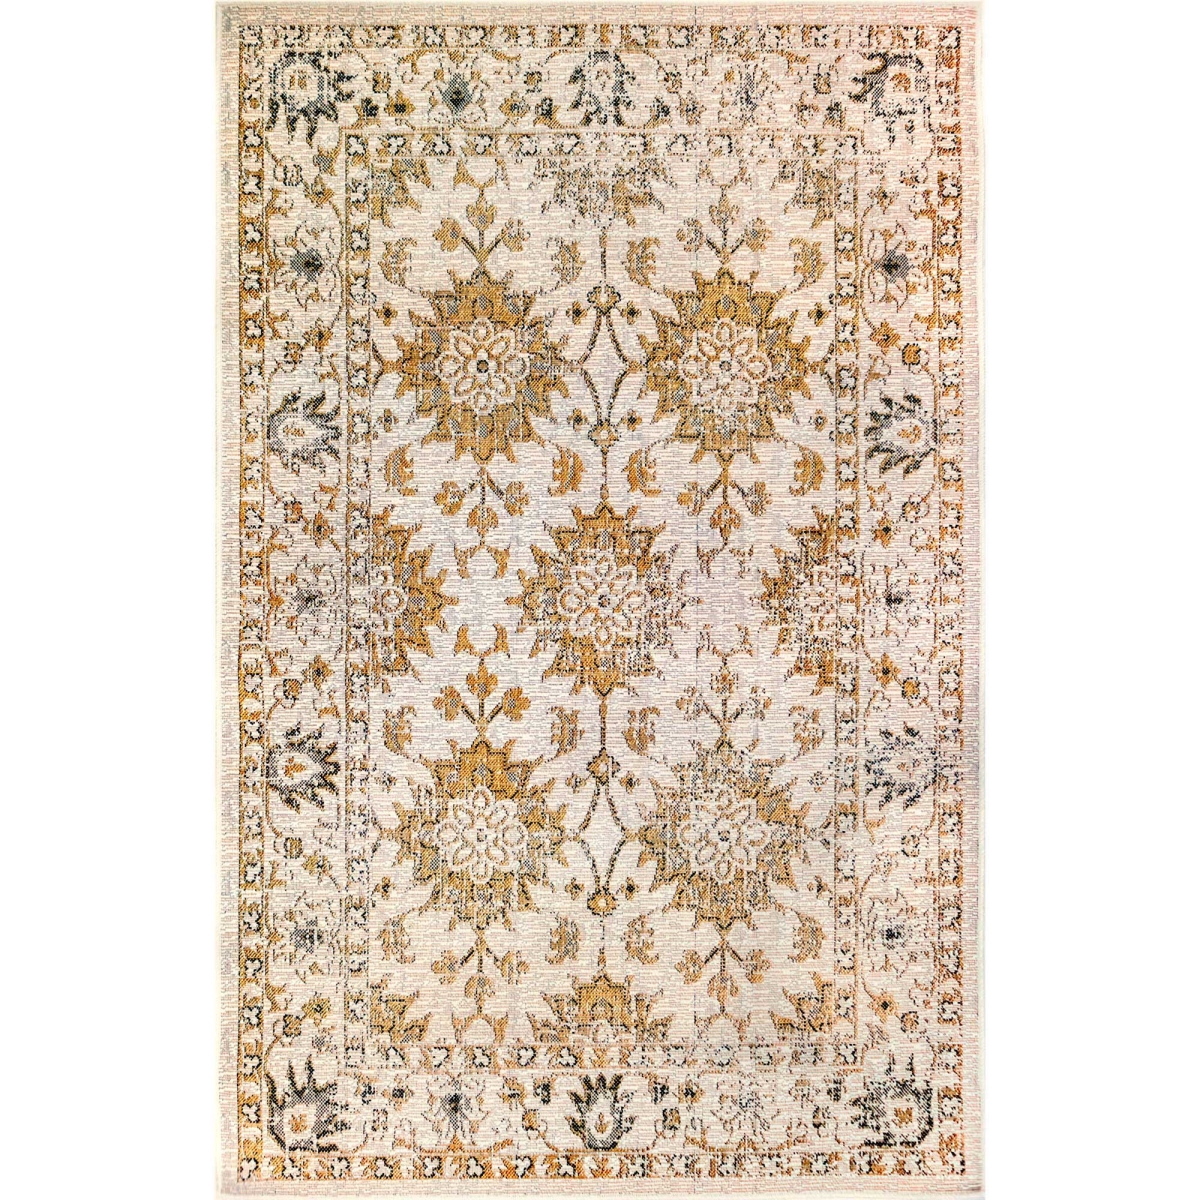 Trans-ocean Imports Cre69841812 6 Ft. 6 In. X 9 Ft. 4 In. Liora Manne Carmel Vintage Floral Indoor & Outdoor Rug Wilton Woven Rectangular Rug - Sand